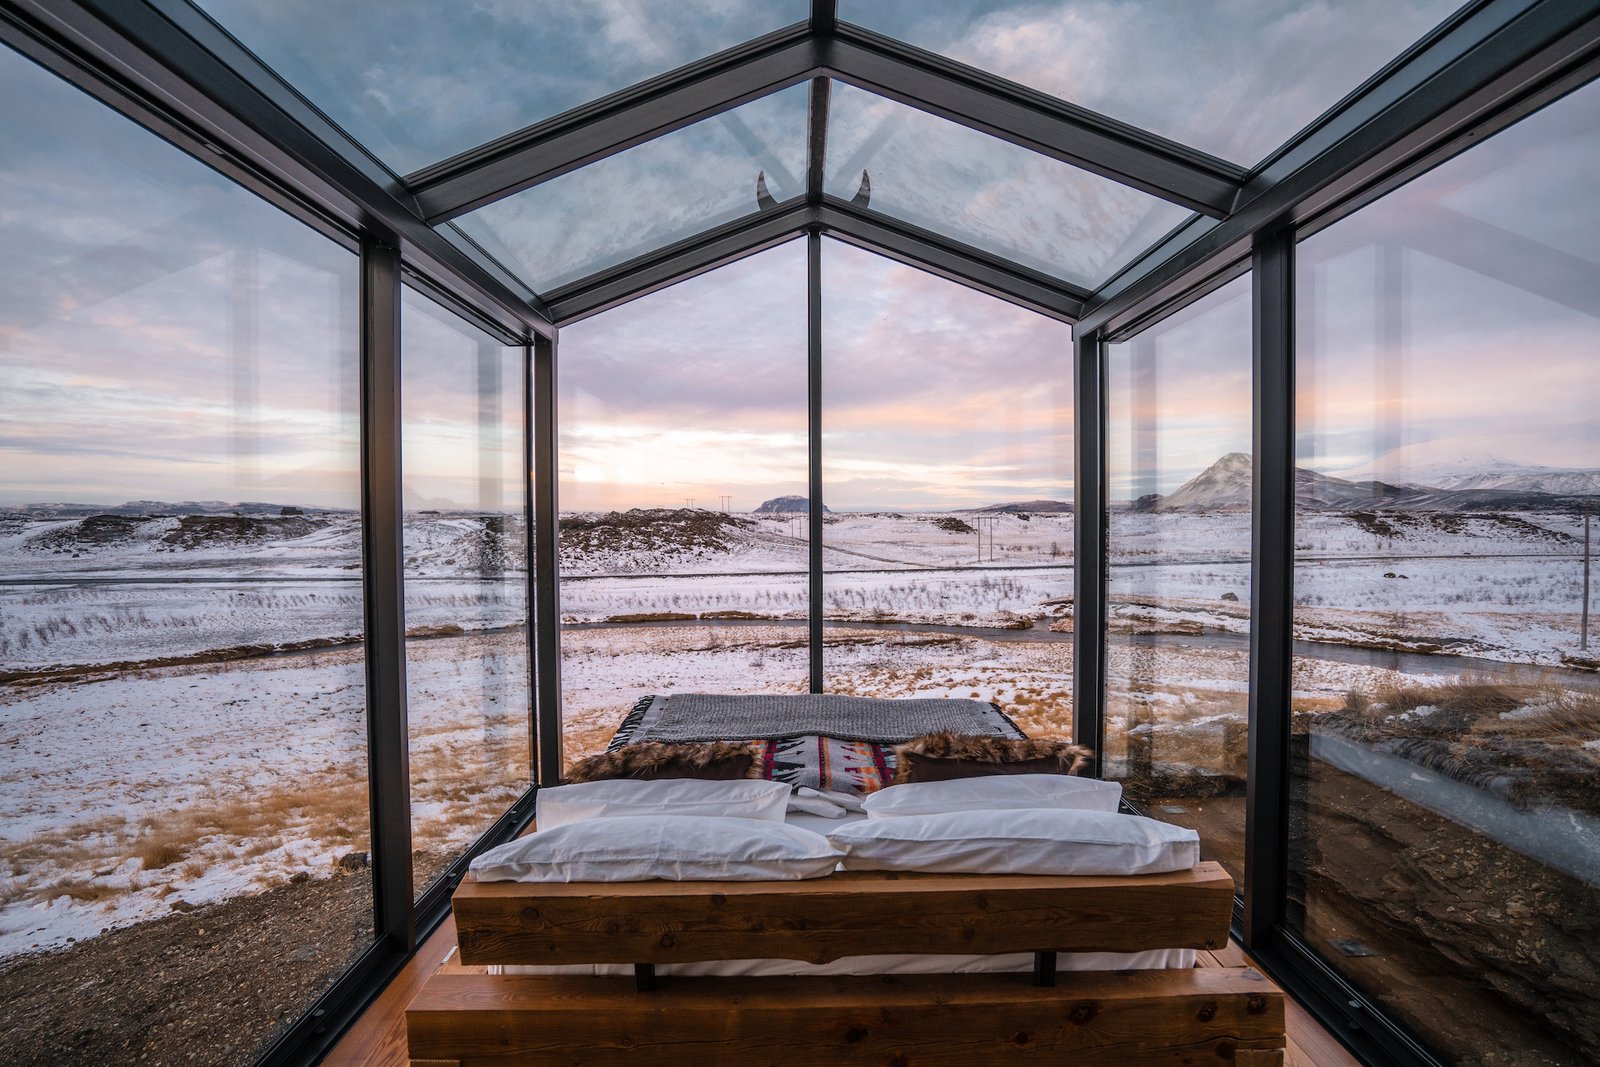 This Tiny Glass Cabin in Remote Iceland Takes Stargazing to the Next Level